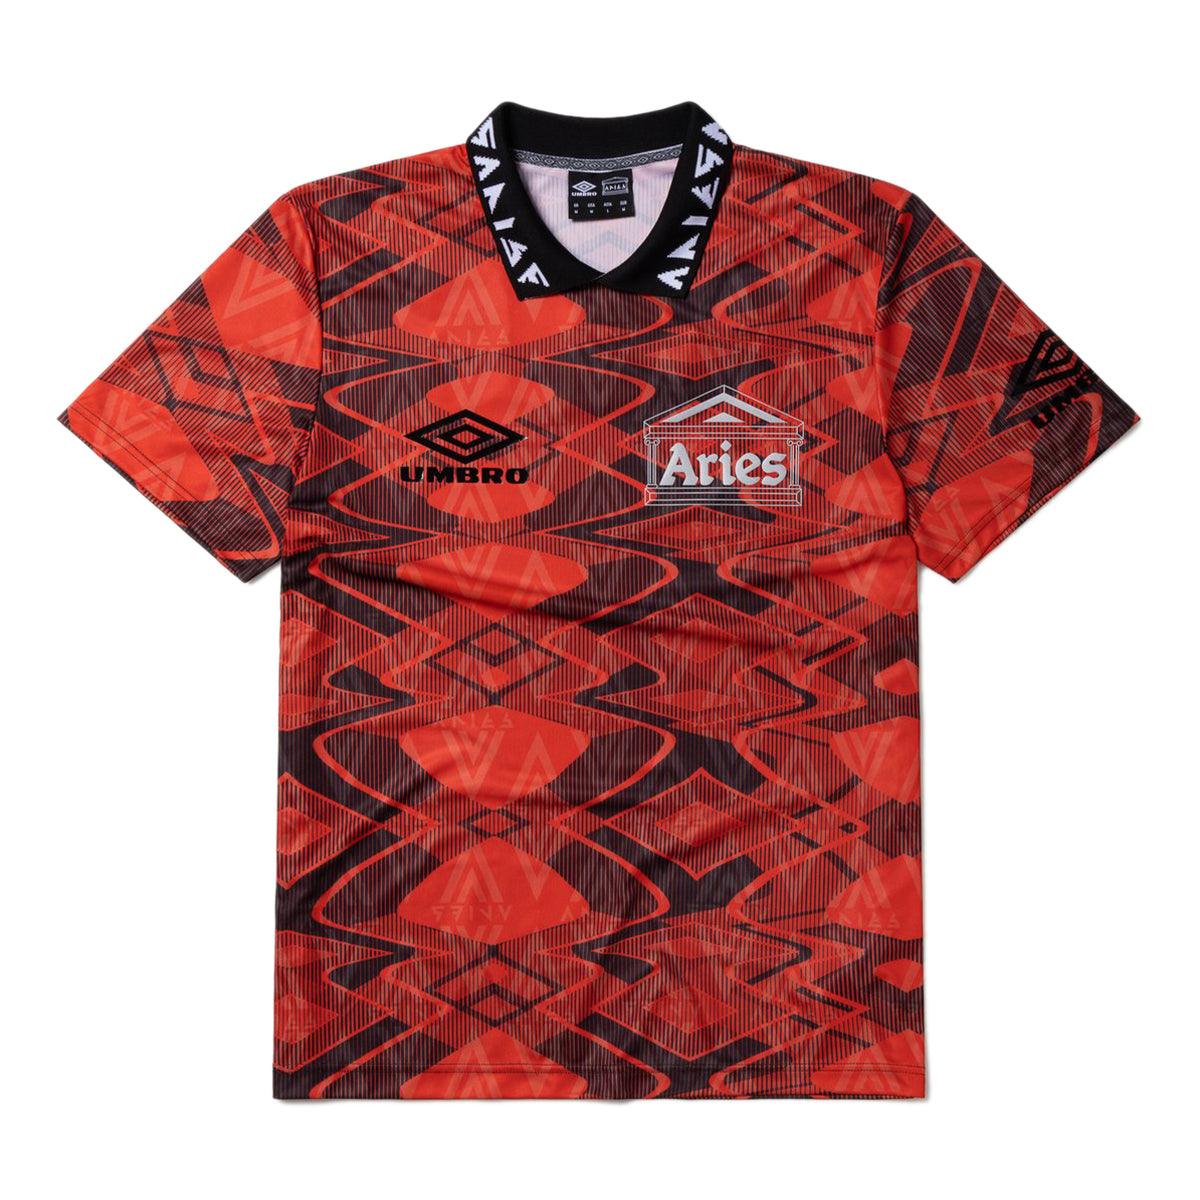 UMBRO ARIES SS FOOTBALL JERSEY RED